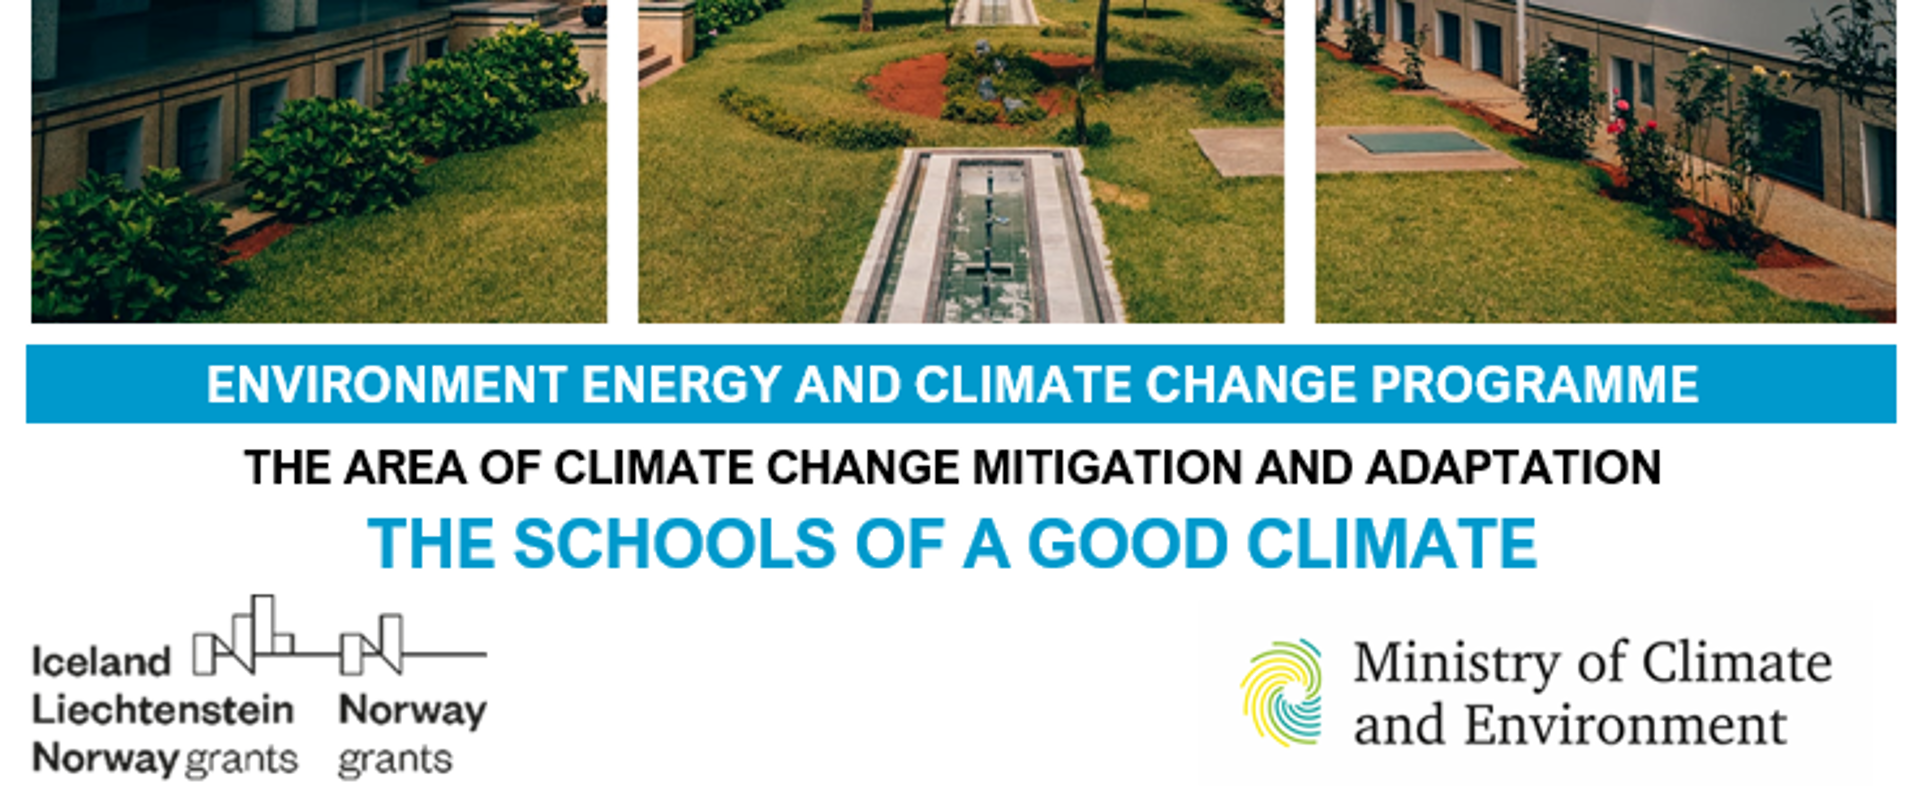 Agreement on the implementation of the Schools of a Good Climate project has been signed